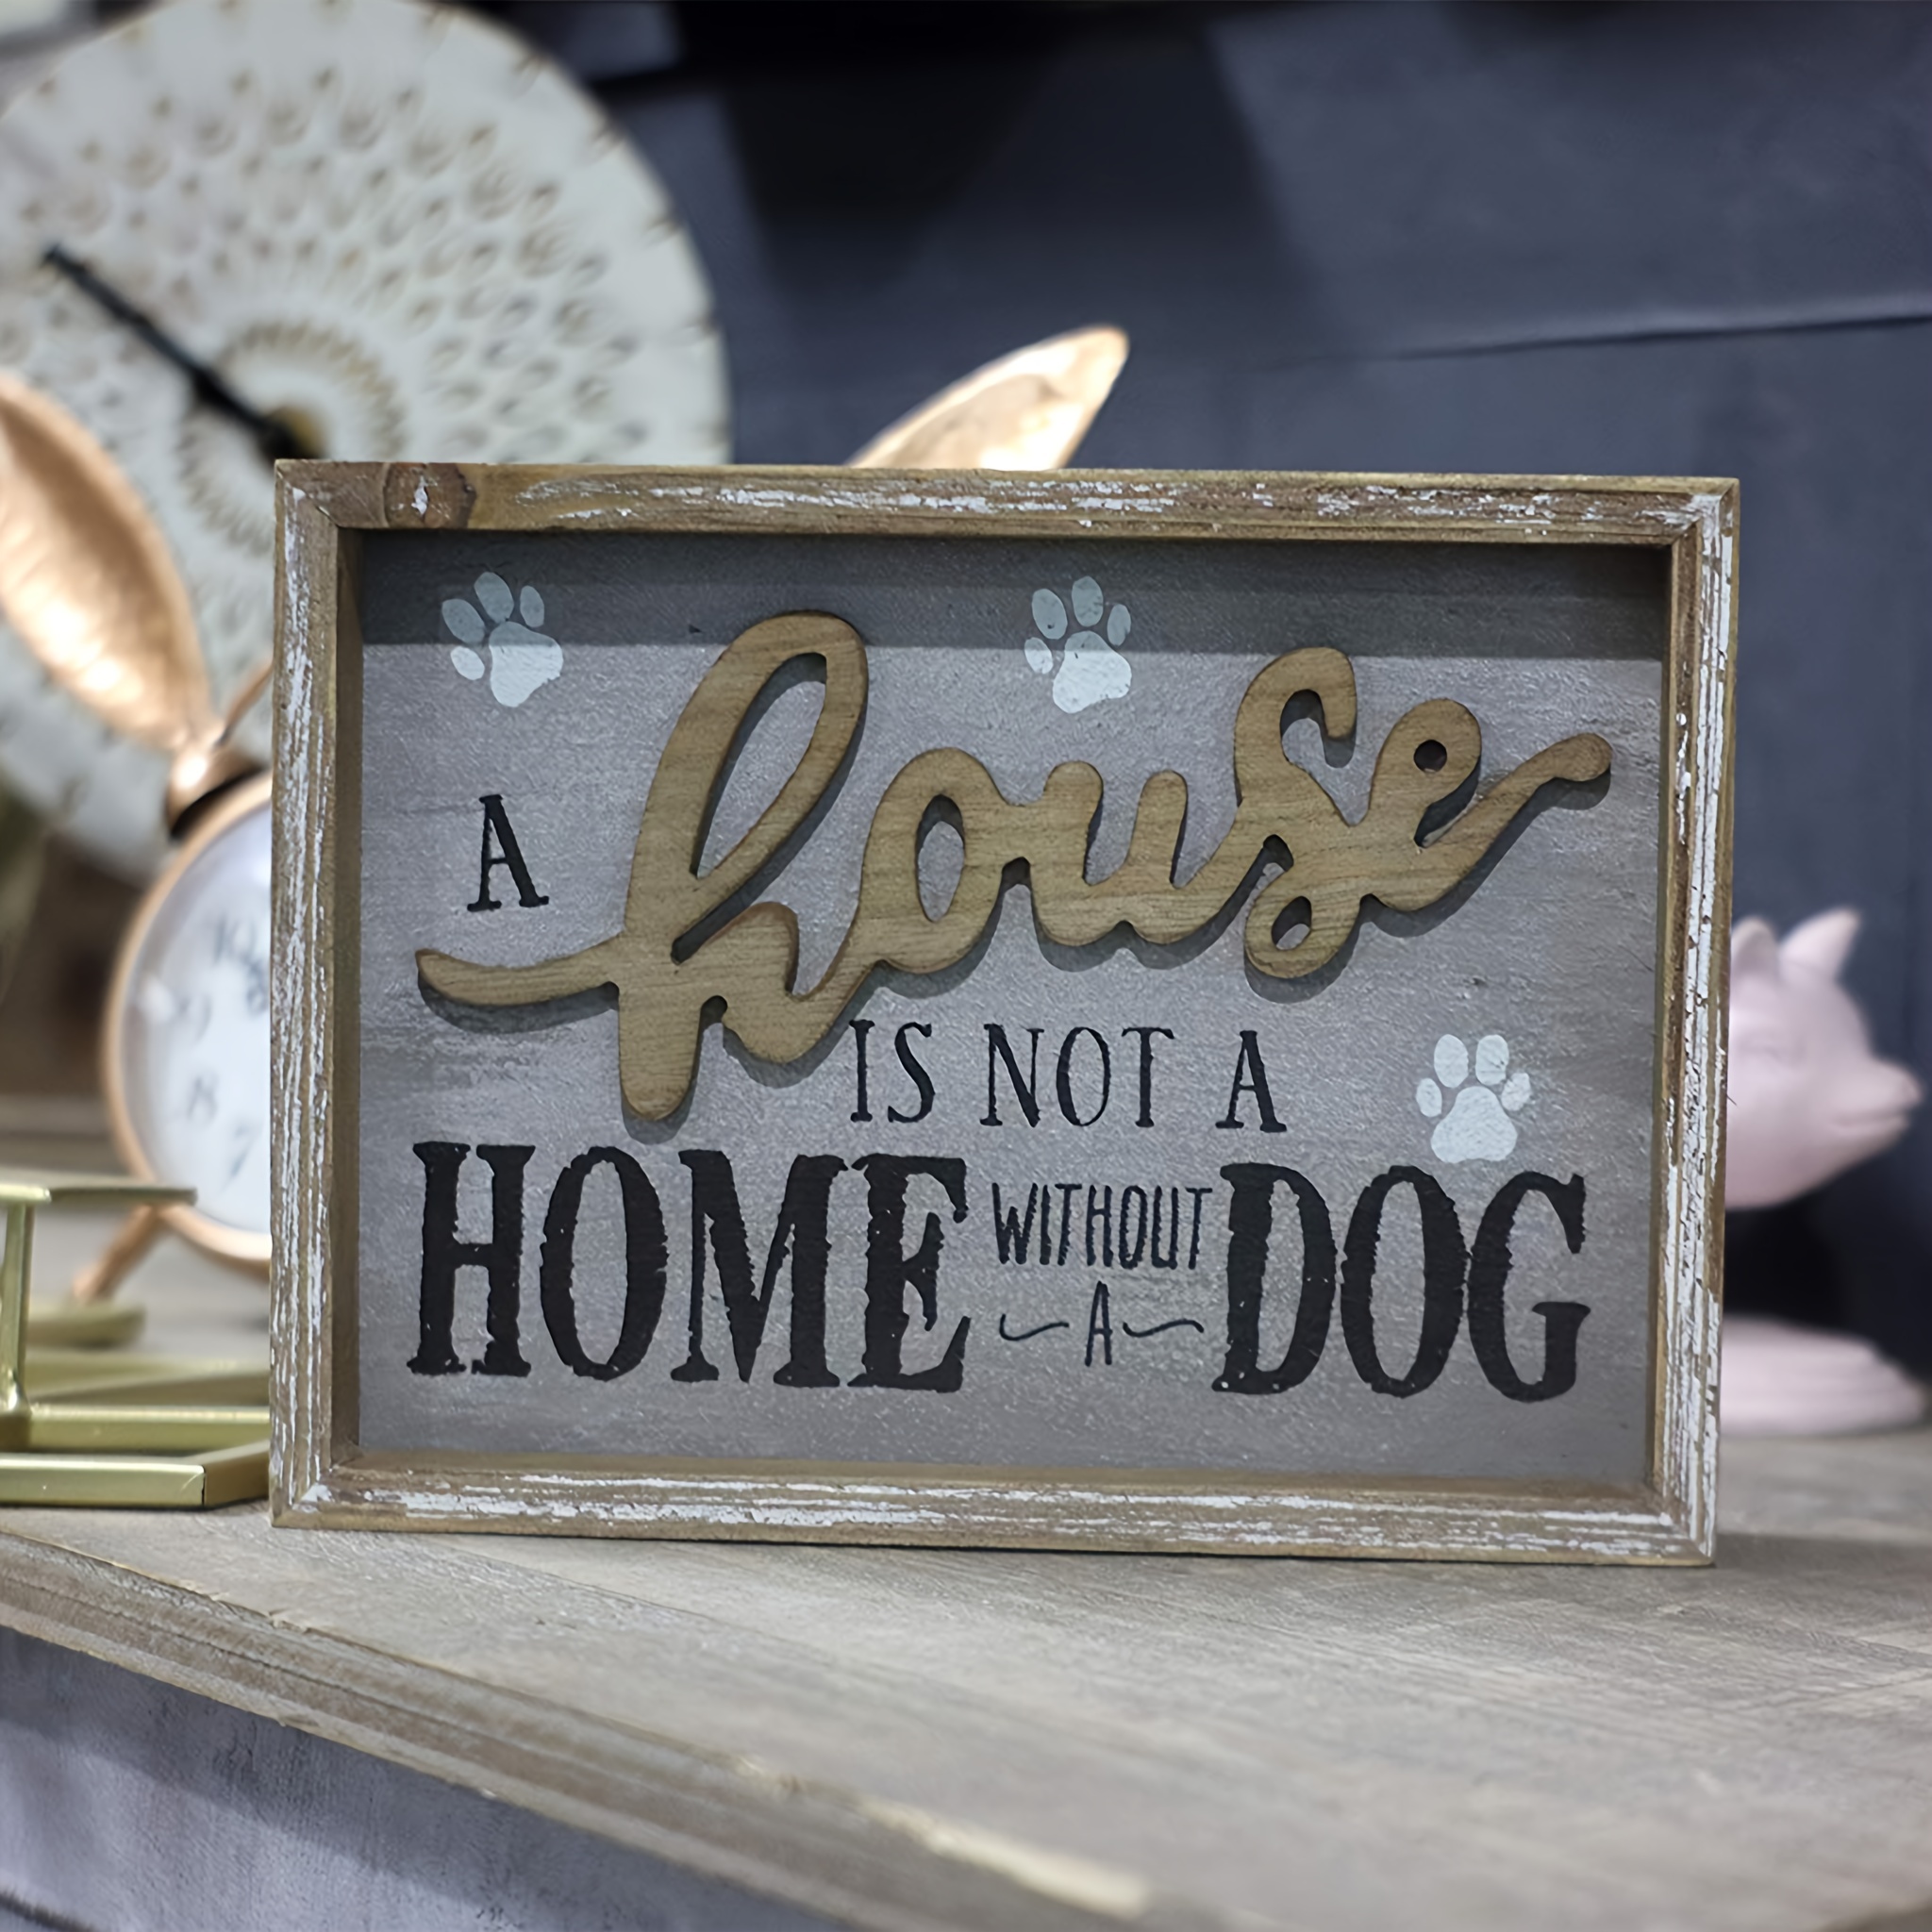 

A House Is Not A Home Without A Dog Wooden Dog Signs For Dog Lovers|rustic Wood Pet Sign Plaque